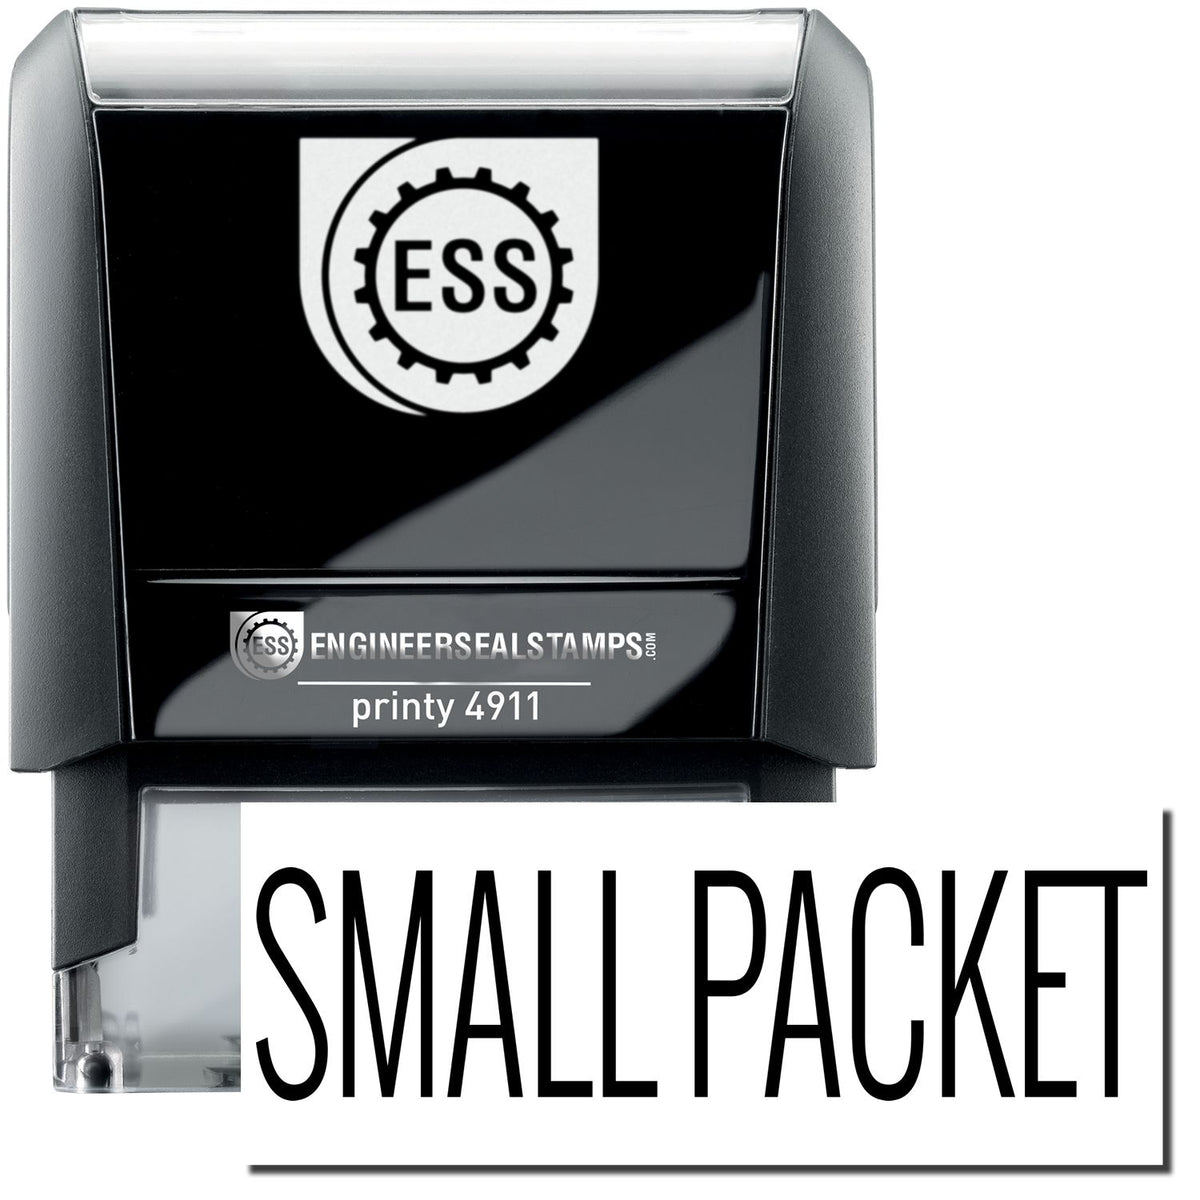 A self-inking stamp with a stamped image showing how the text &quot;SMALL PACKET&quot; is displayed after stamping.